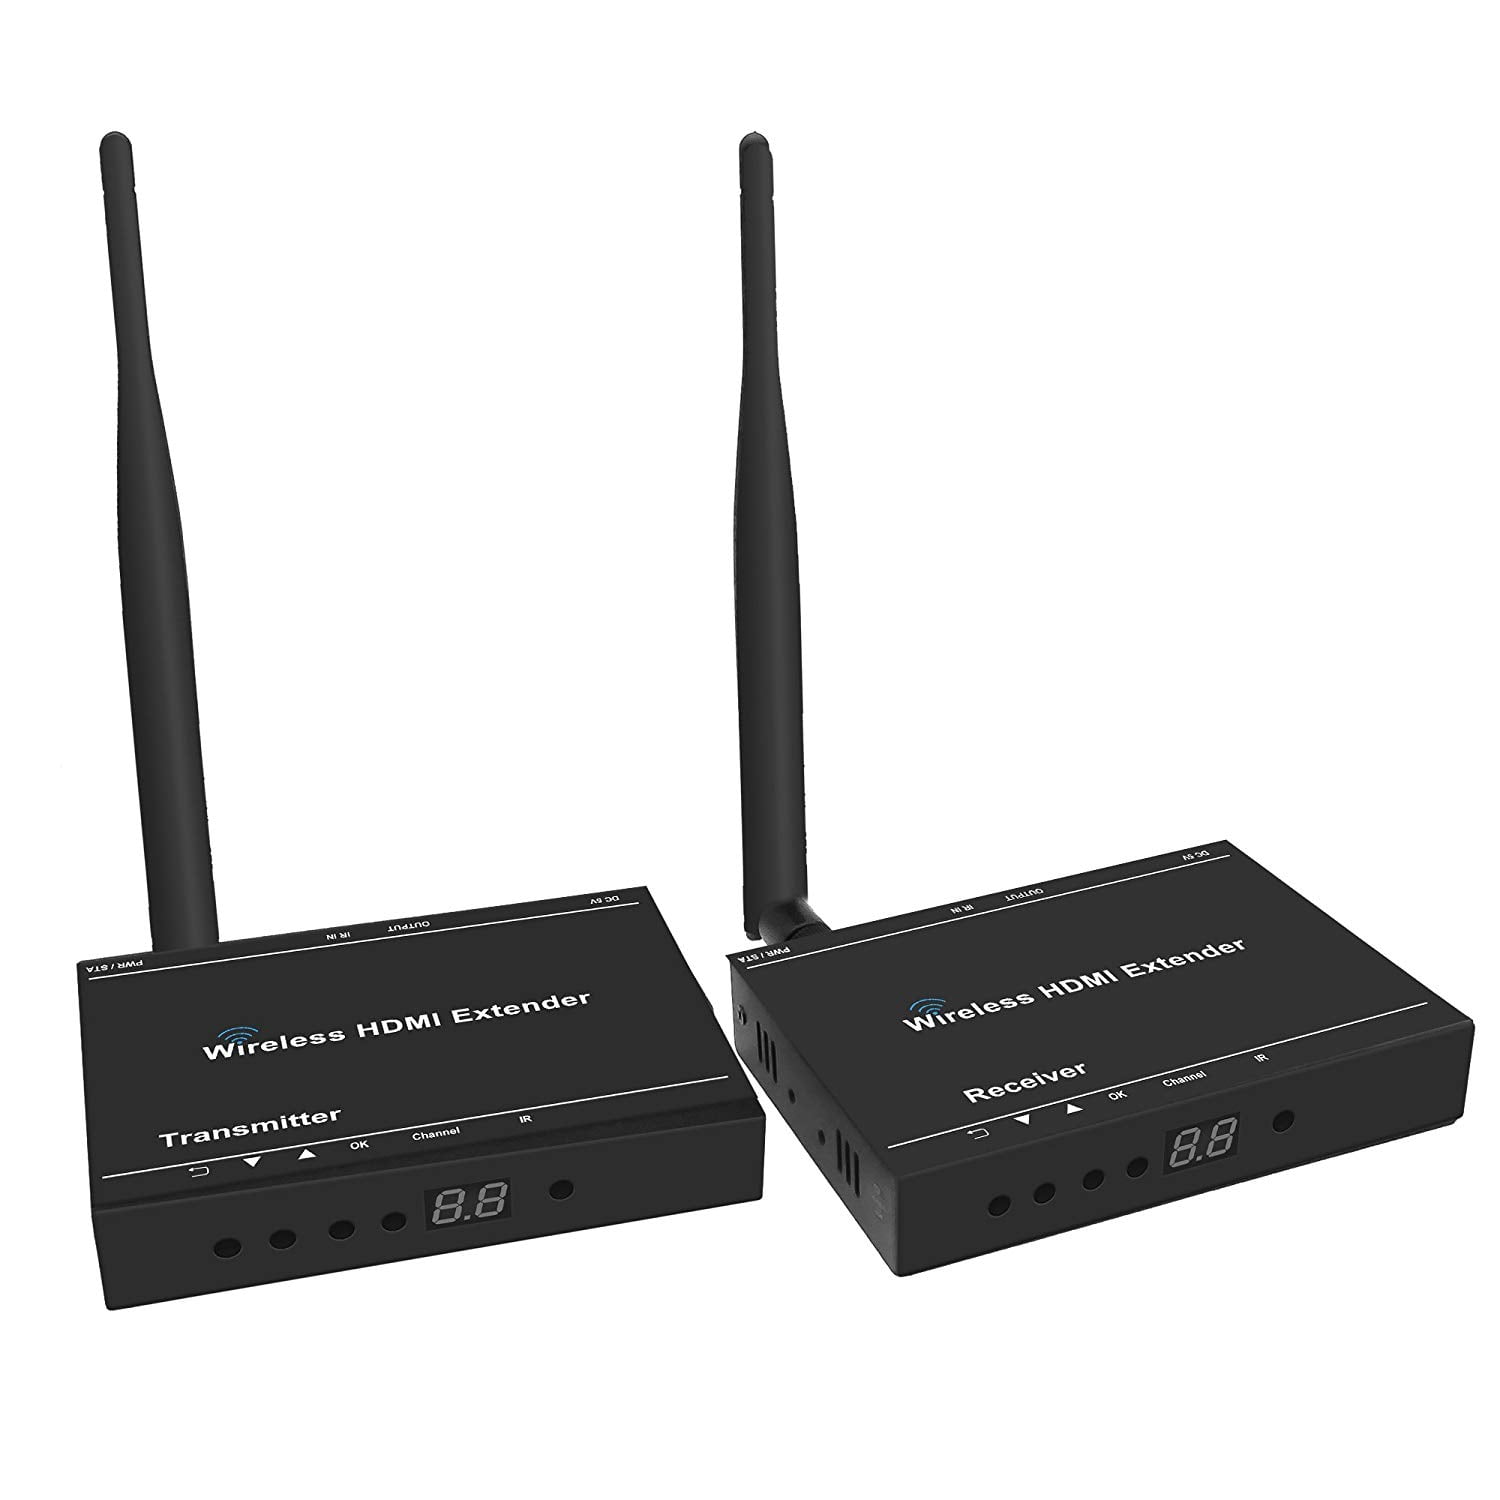 Wireless HDMI Extender Transmitter Dongle & Receiver @1080P up to